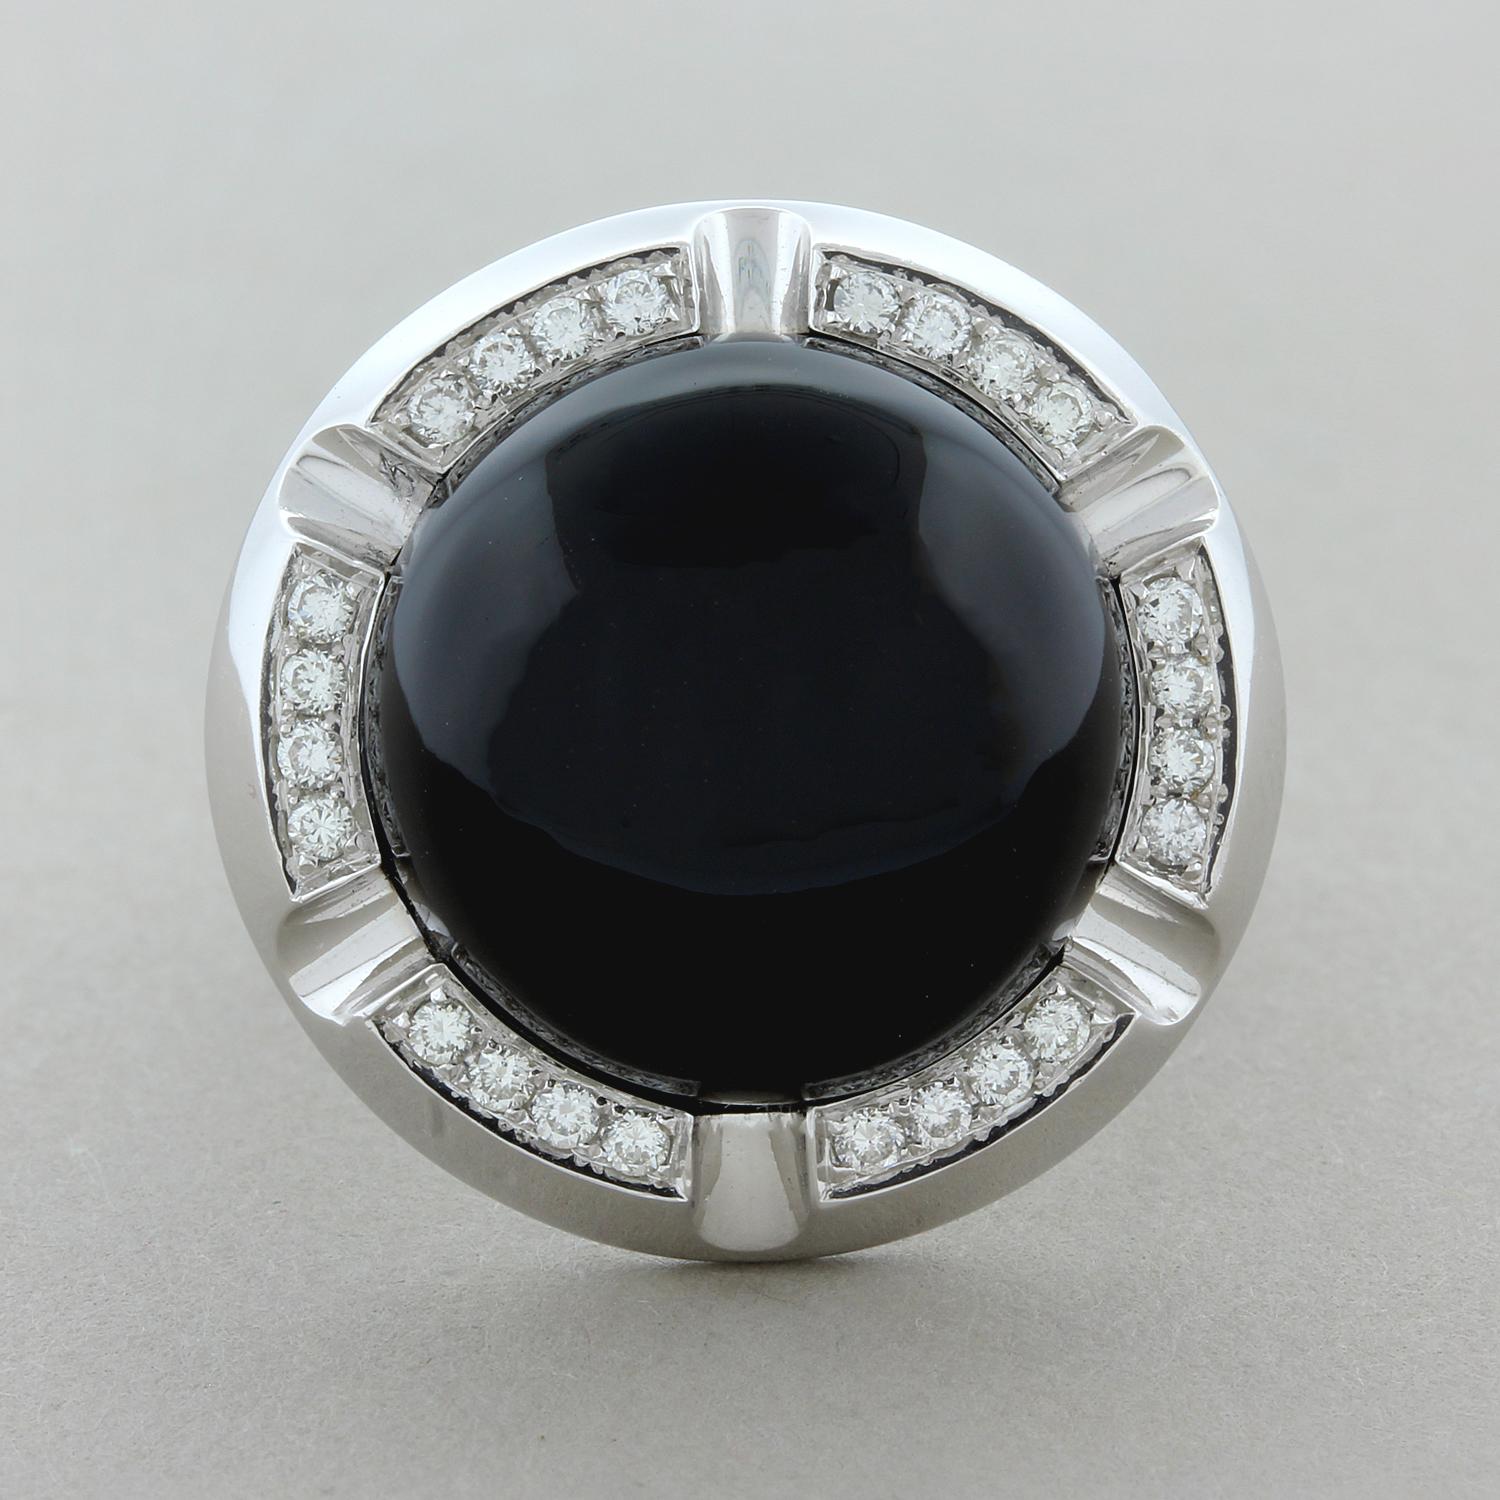 A lovely ring featuring a 17.60 carat piece of sleek black onyx with great luster. The onyx is haloed by 0.30 carats of round brilliant cut diamonds set in 18K white gold. There is great contrast between the deep black onyx and the bright sparkling